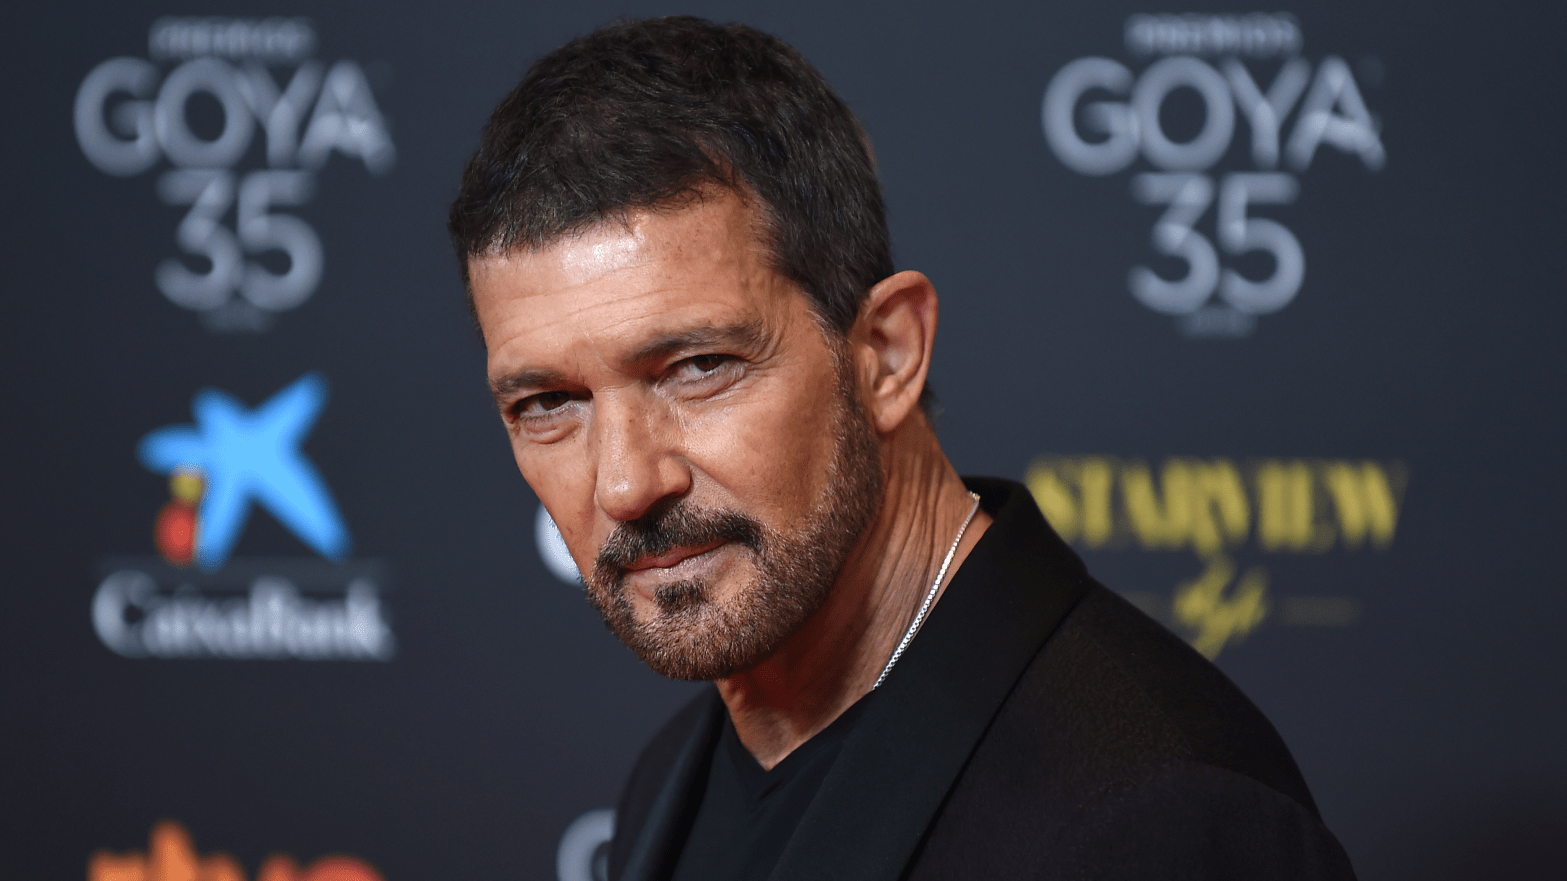 Spanish actor Antonio Banderas poses on the Red Carpet prior to presenting the 35th Spain's Goya Film Awards gala in Malaga on March 6, 2021. (Photo: Jorge Guerrero/AFP, Getty Images)